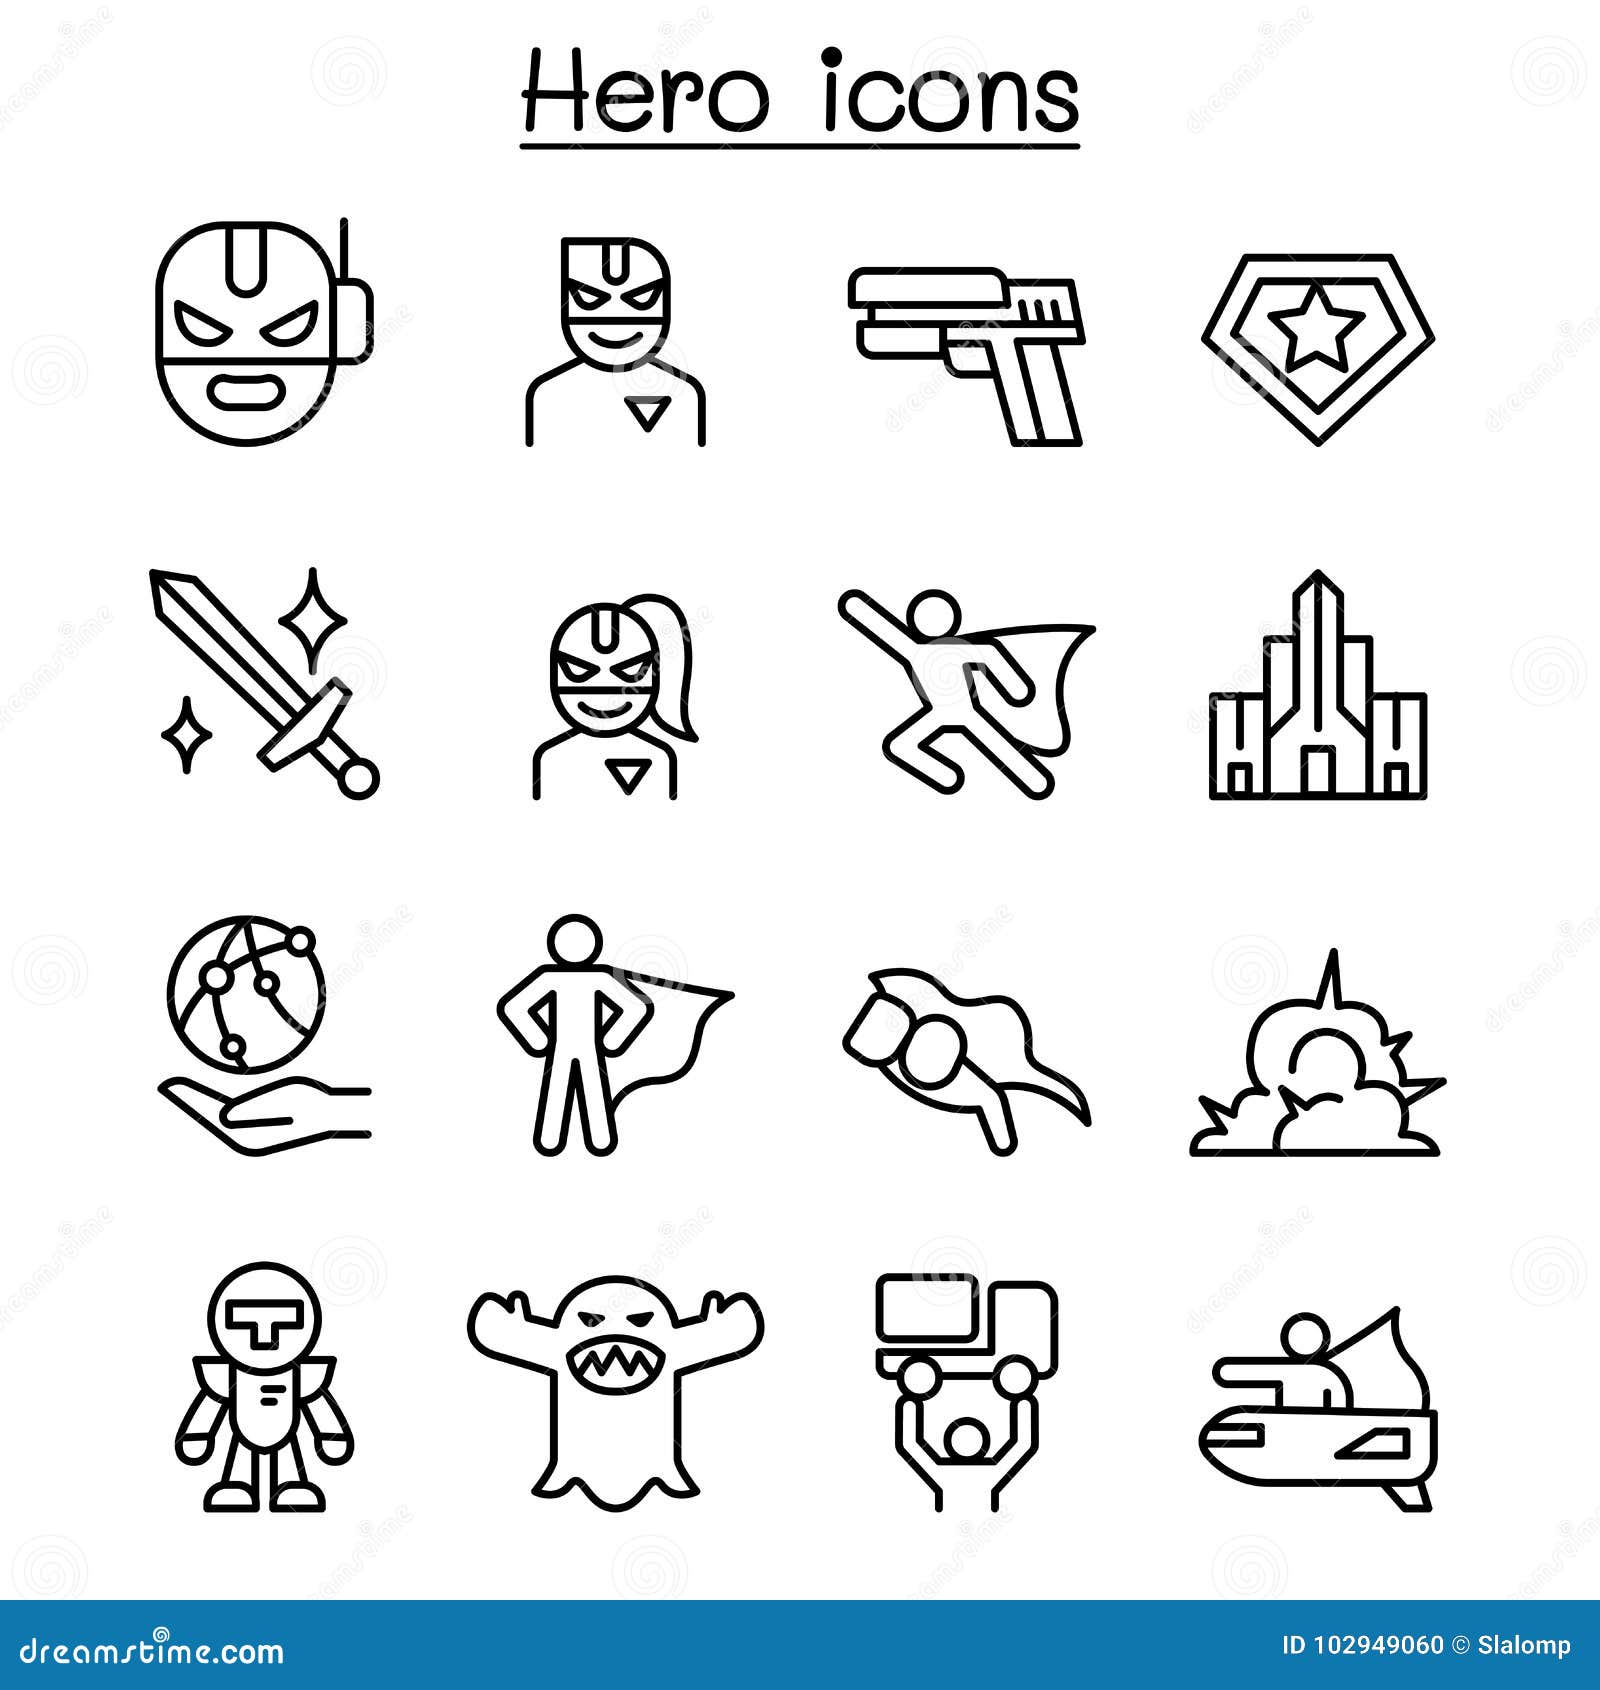 super hero icon set in thin line style